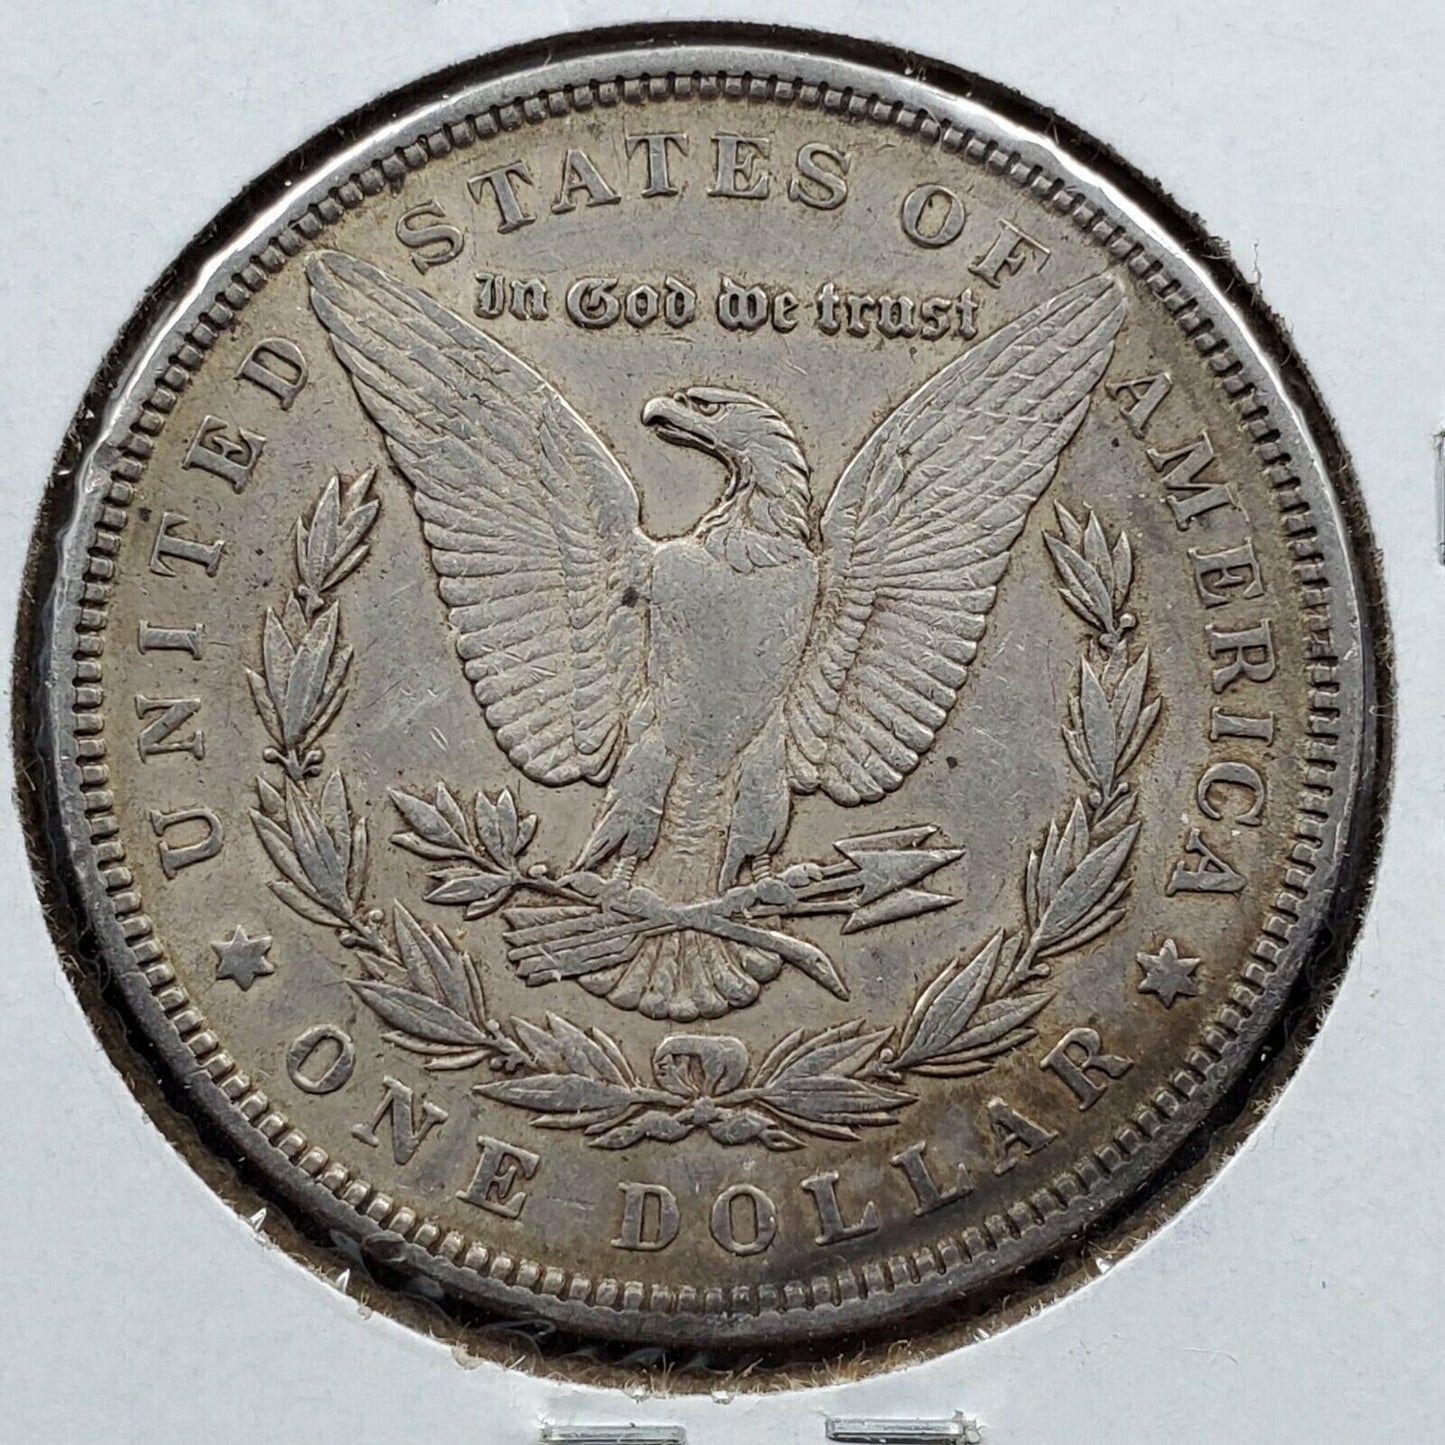 1891 P $1 Morgan Silver Eagle Dollar Coin Average AU About UNC Circulated Toned